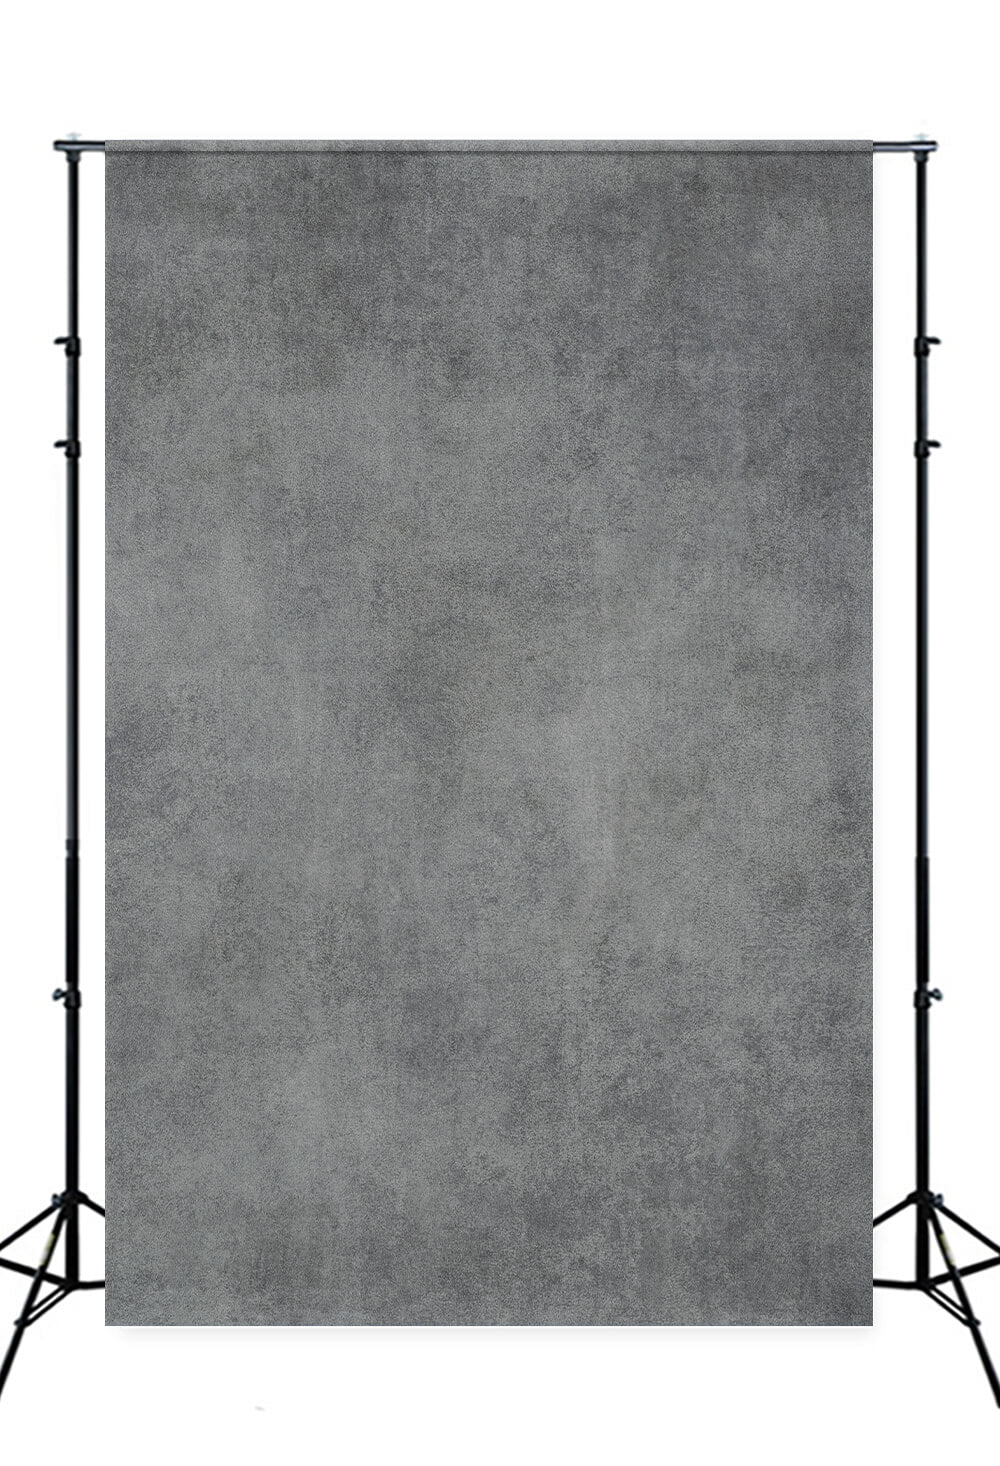 Abstract Dark Grey Grunge Texture Backdrop for Photo Shoot DHP-574